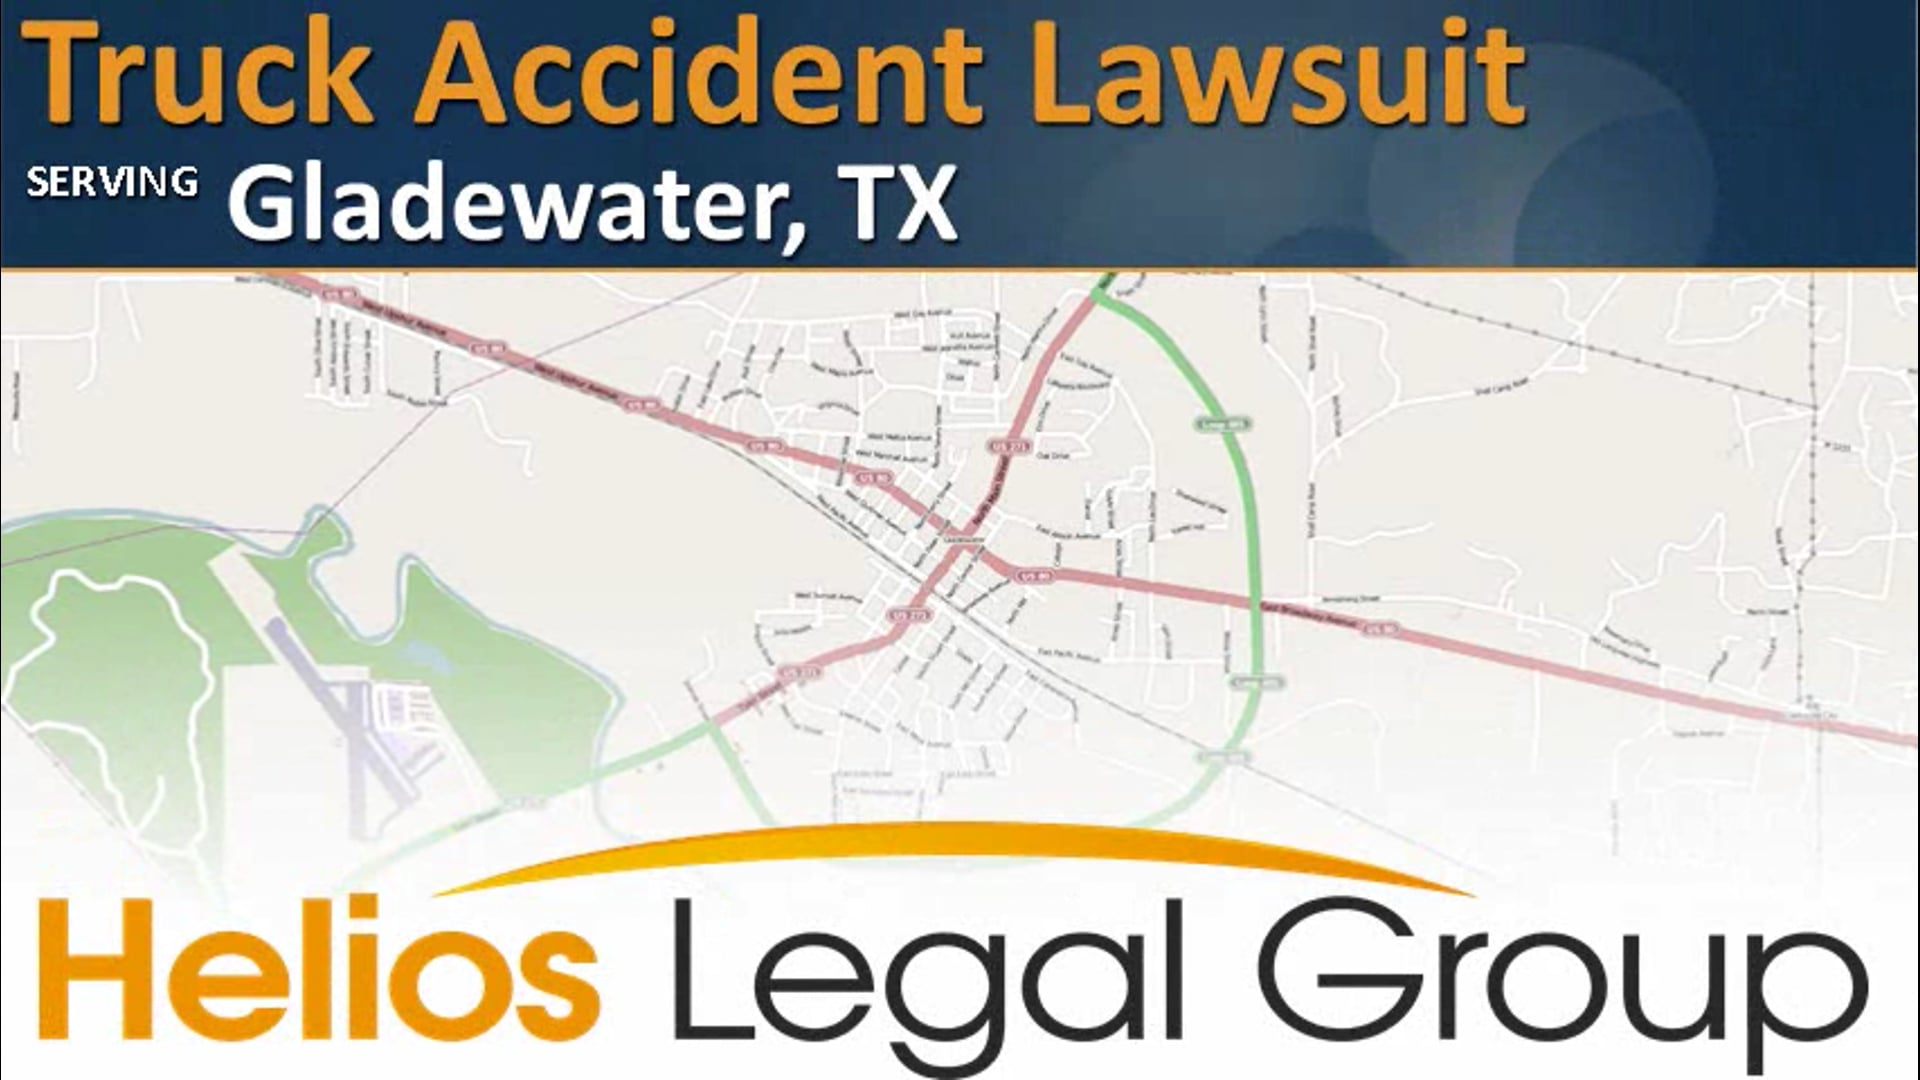 Truck Accident legal question? Talk to a lawyer right now! 1-888-577-5988 – Gladewater, TX